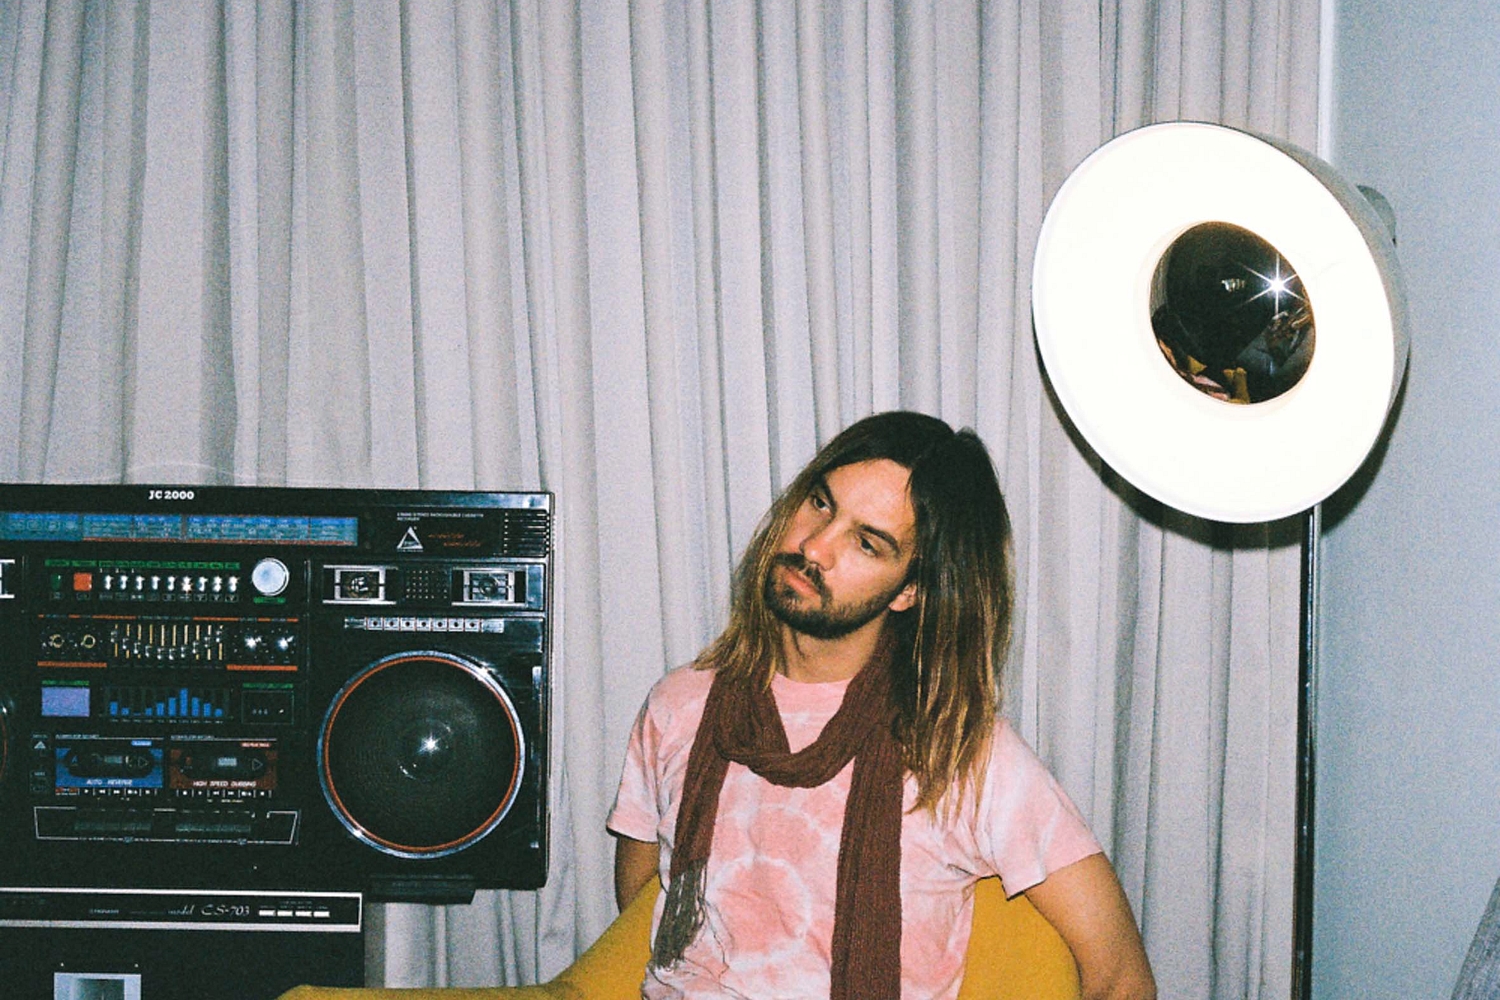 Watch Tame Impala play ‘The Less I Know The Better’ for The Late Show